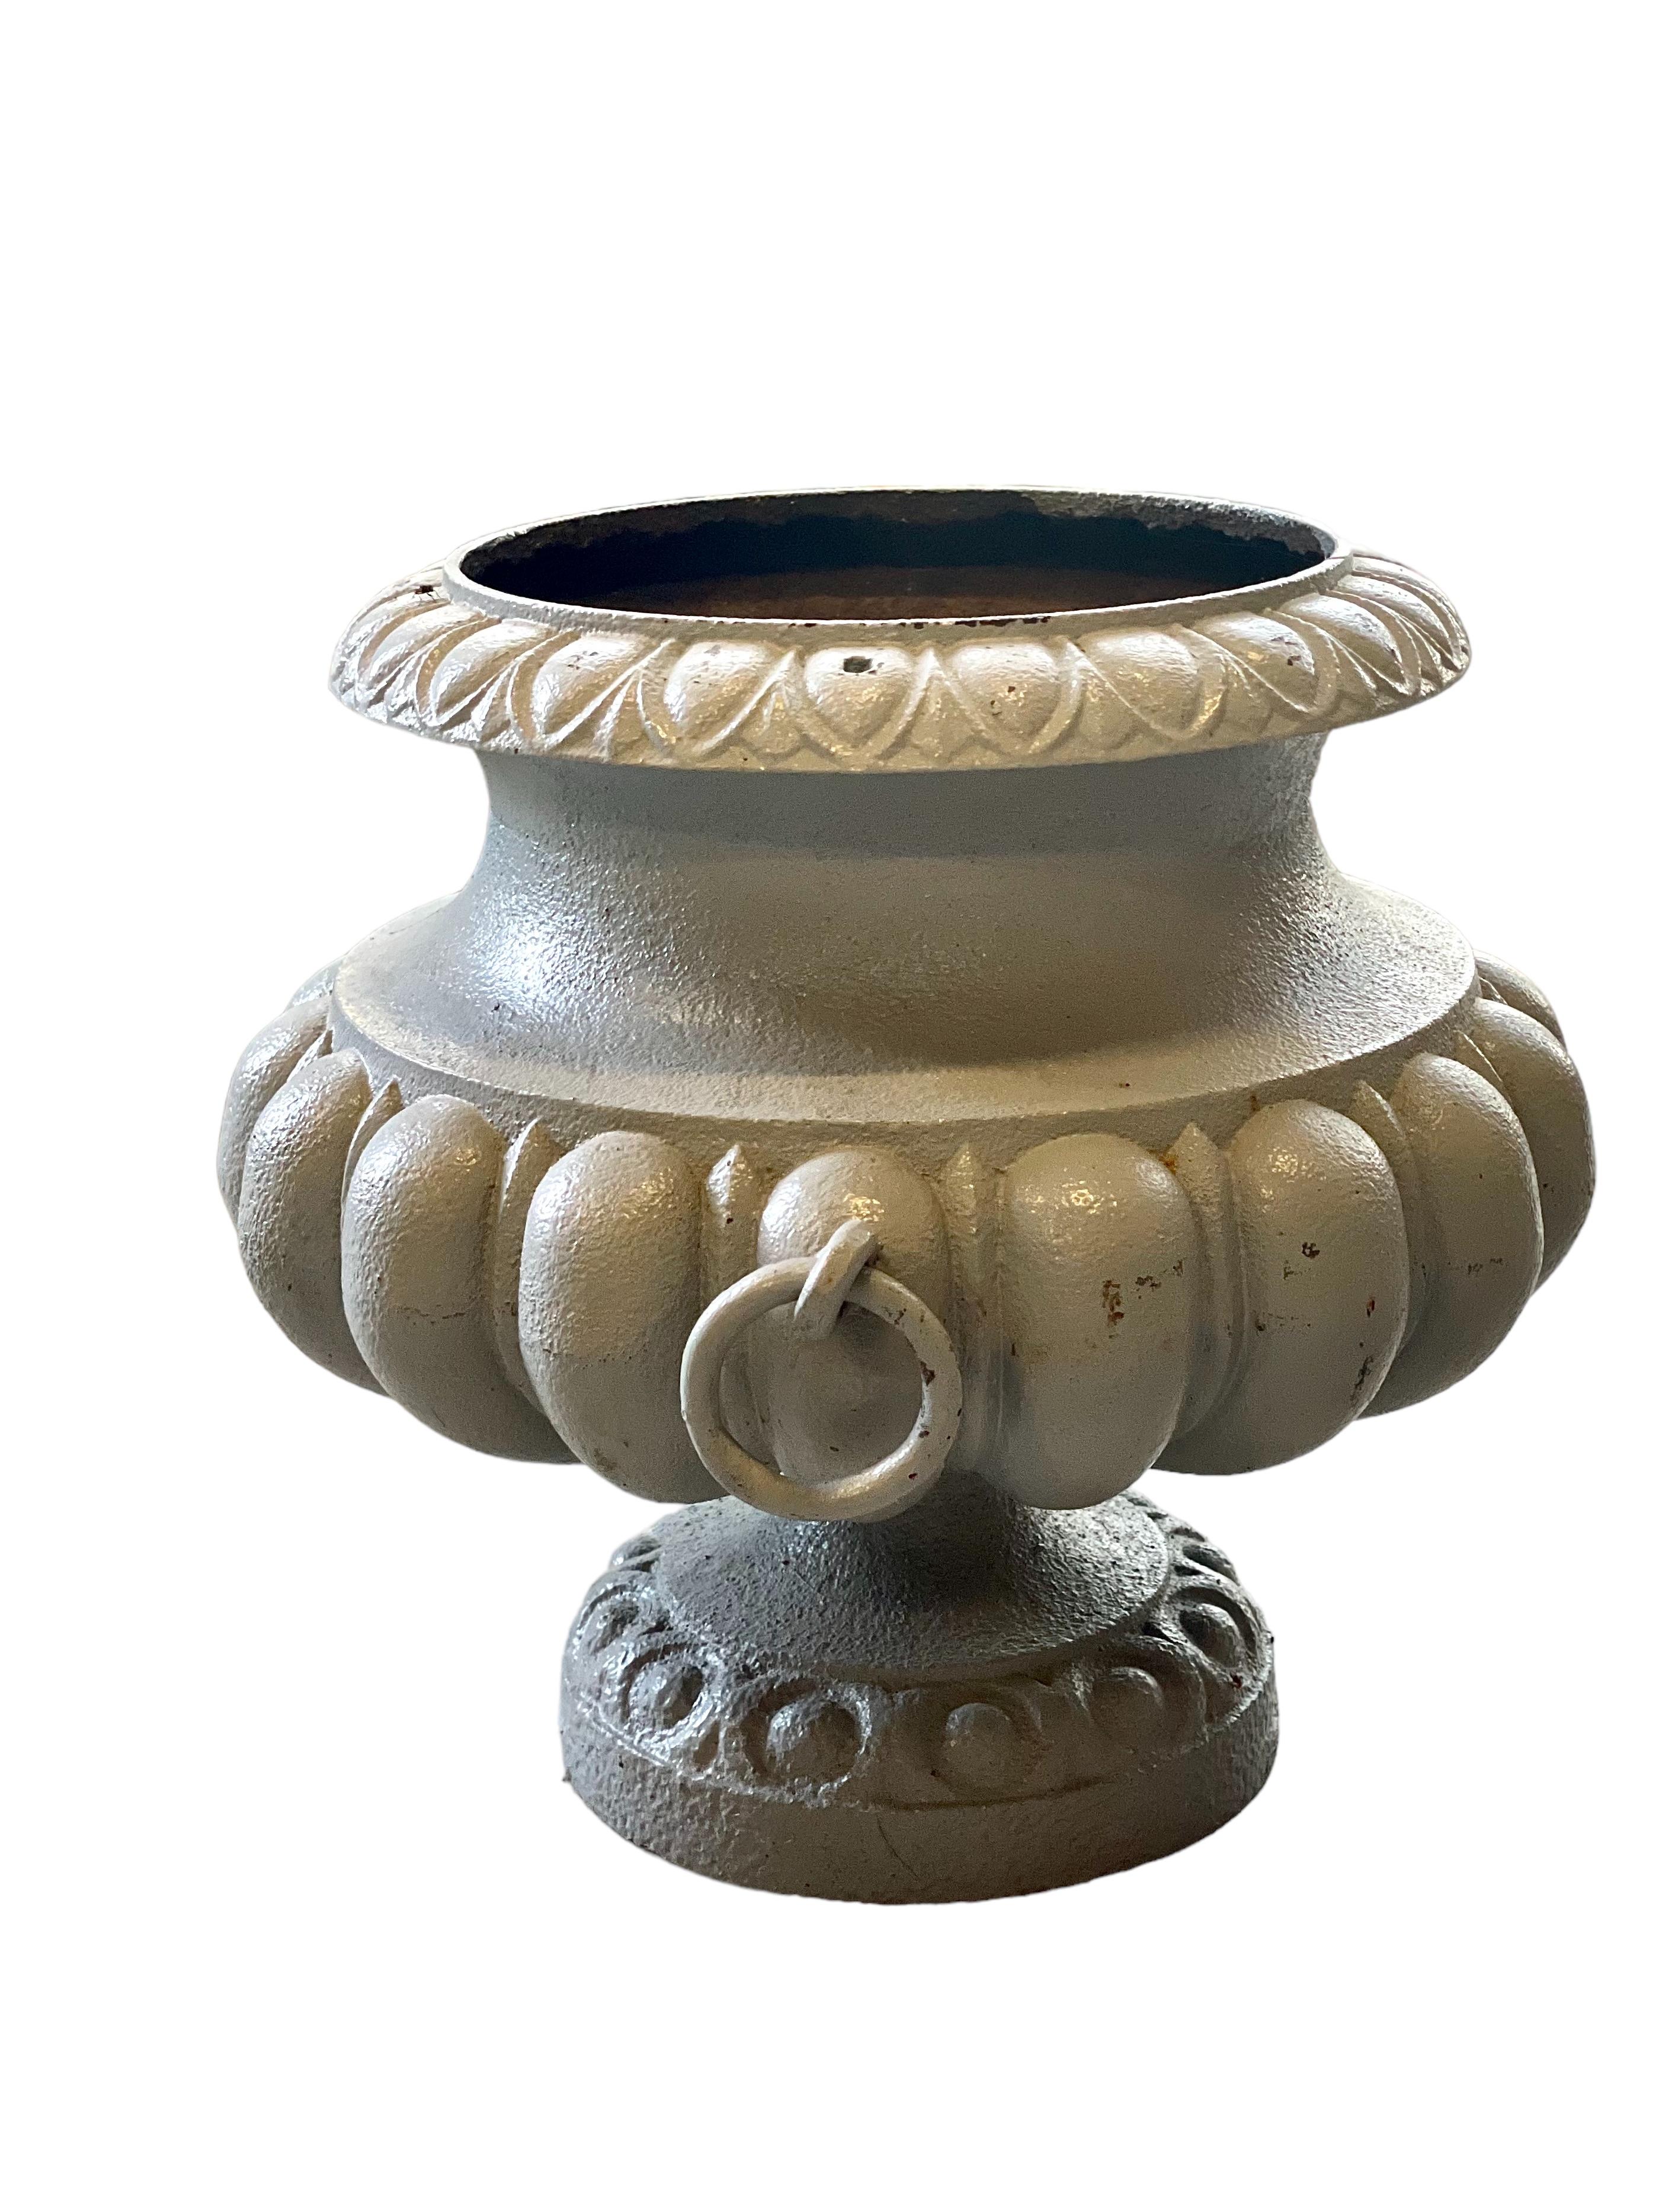 A superb example of a late 19th century garden urn, in the classical French style. This elegant planter features a heavy, cast-iron construction, drop ring handles, a raised pedestal base and an attractive, grey-laquered finish. ‘Feuilles d’eau’